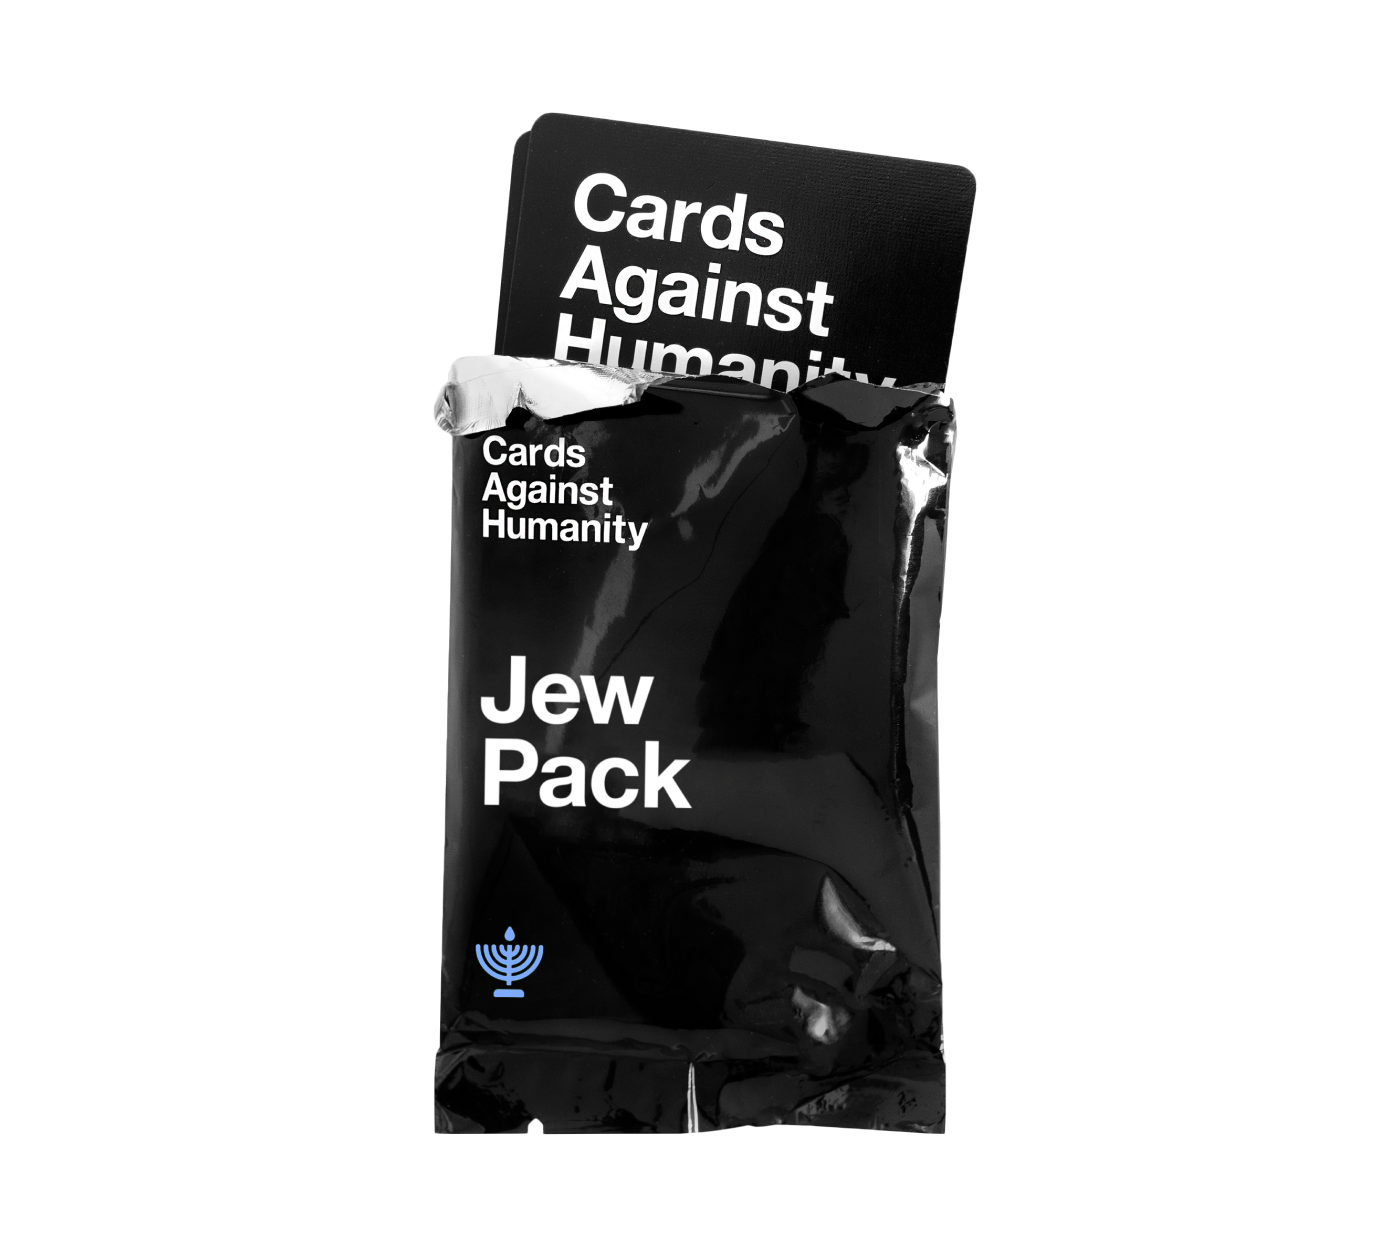 Jew Expansion pack. Genuine Expansion Cards against humanity 